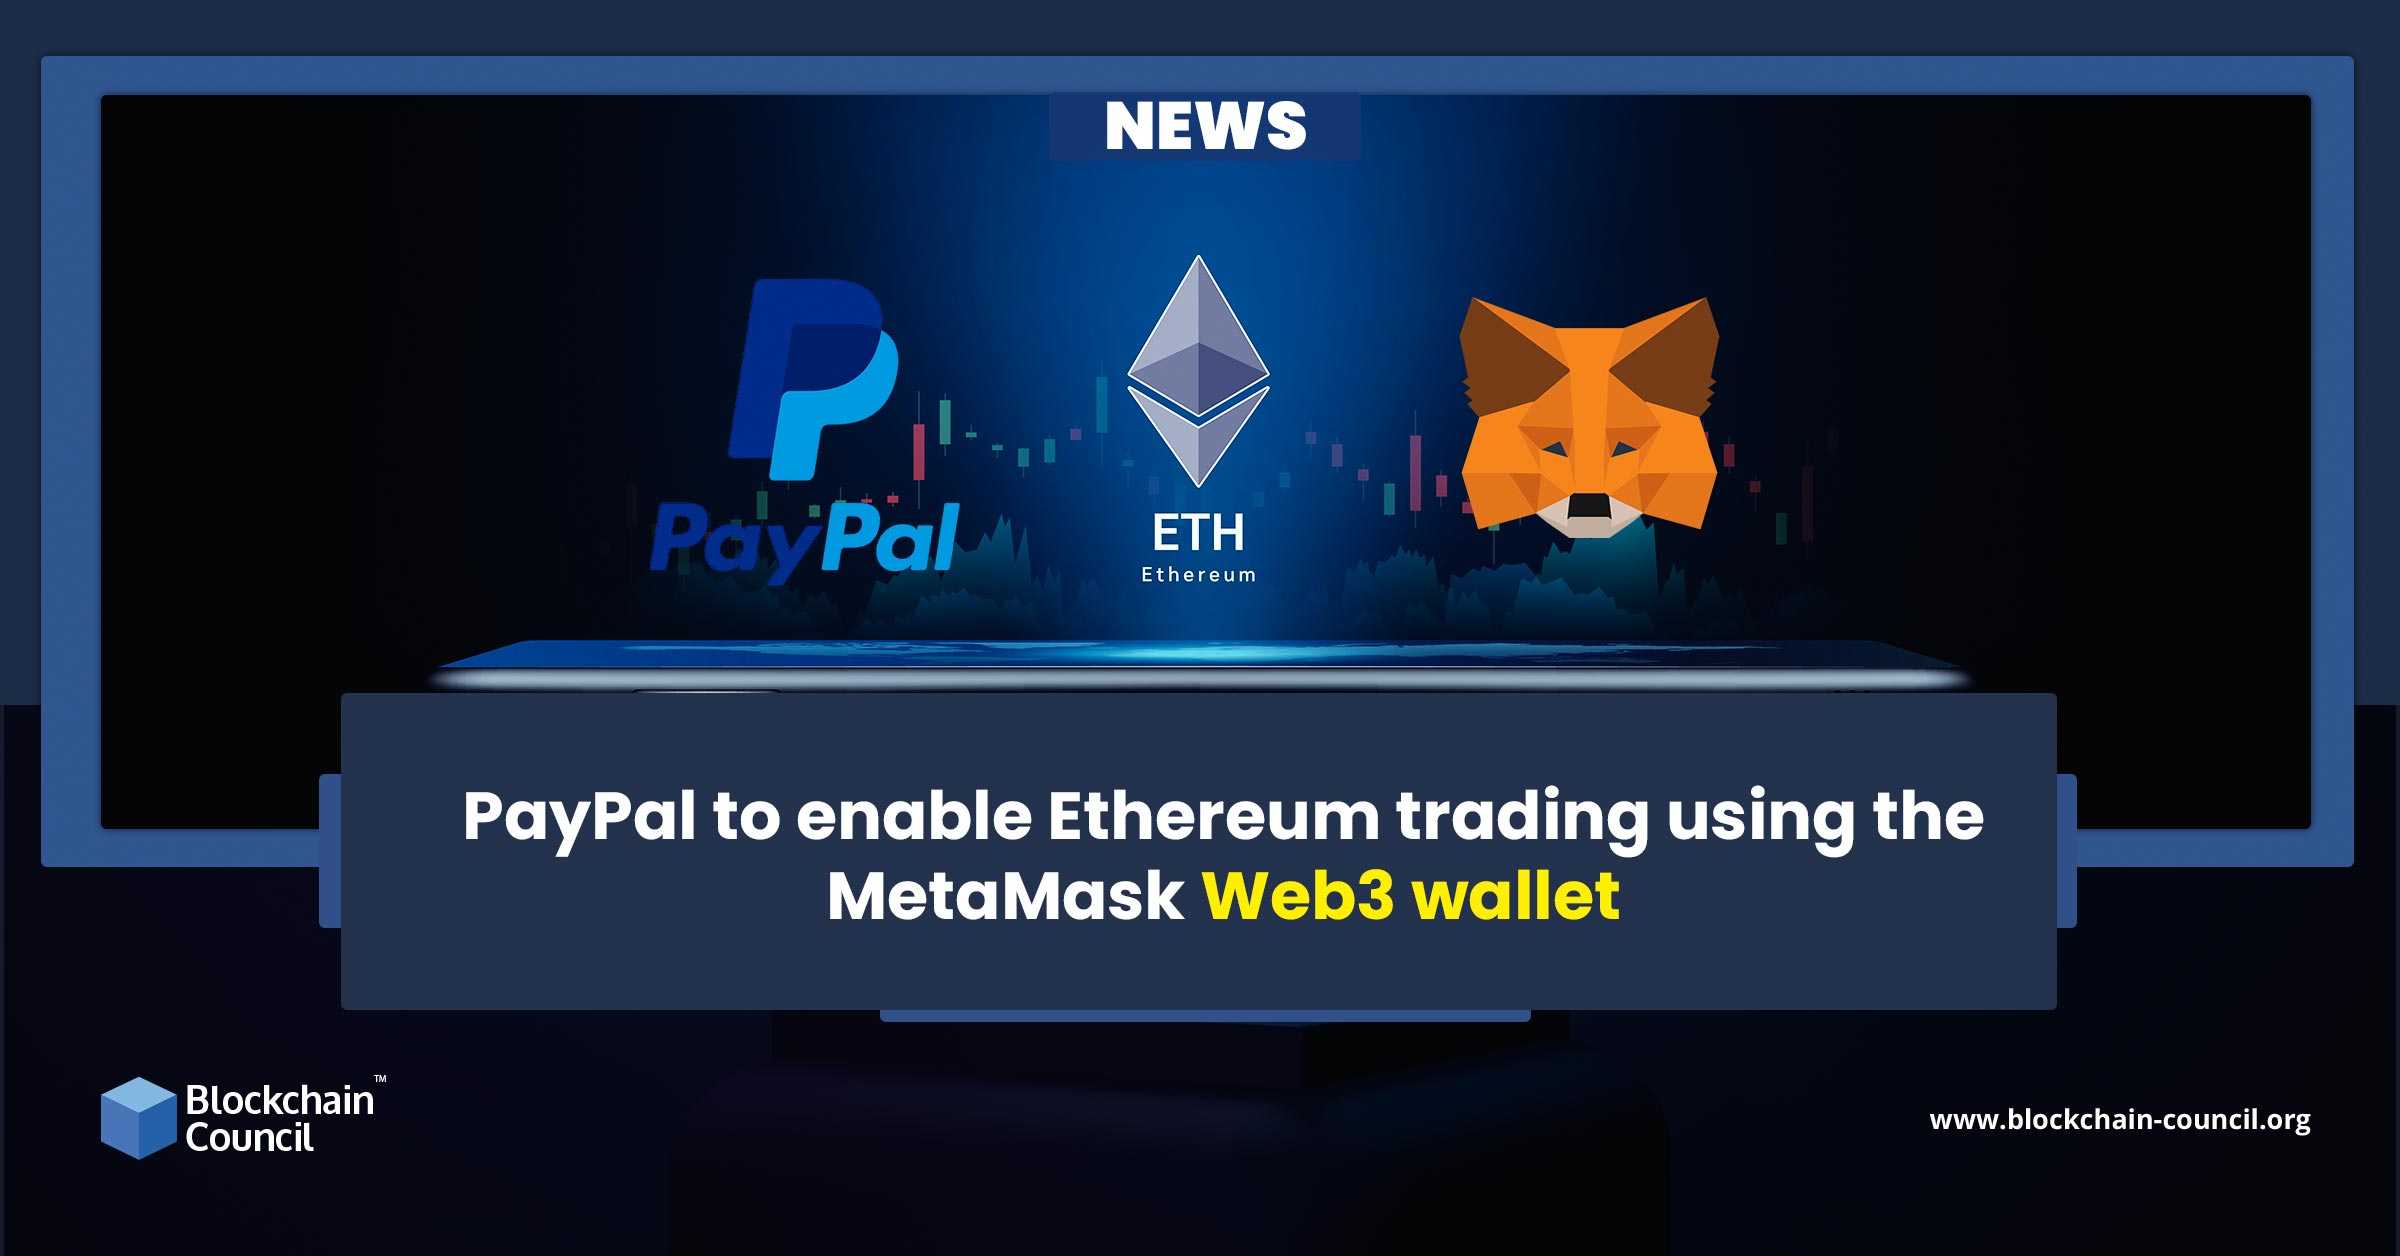 PayPal to enable Ethereum trading using the MetaMask Web3 wallet